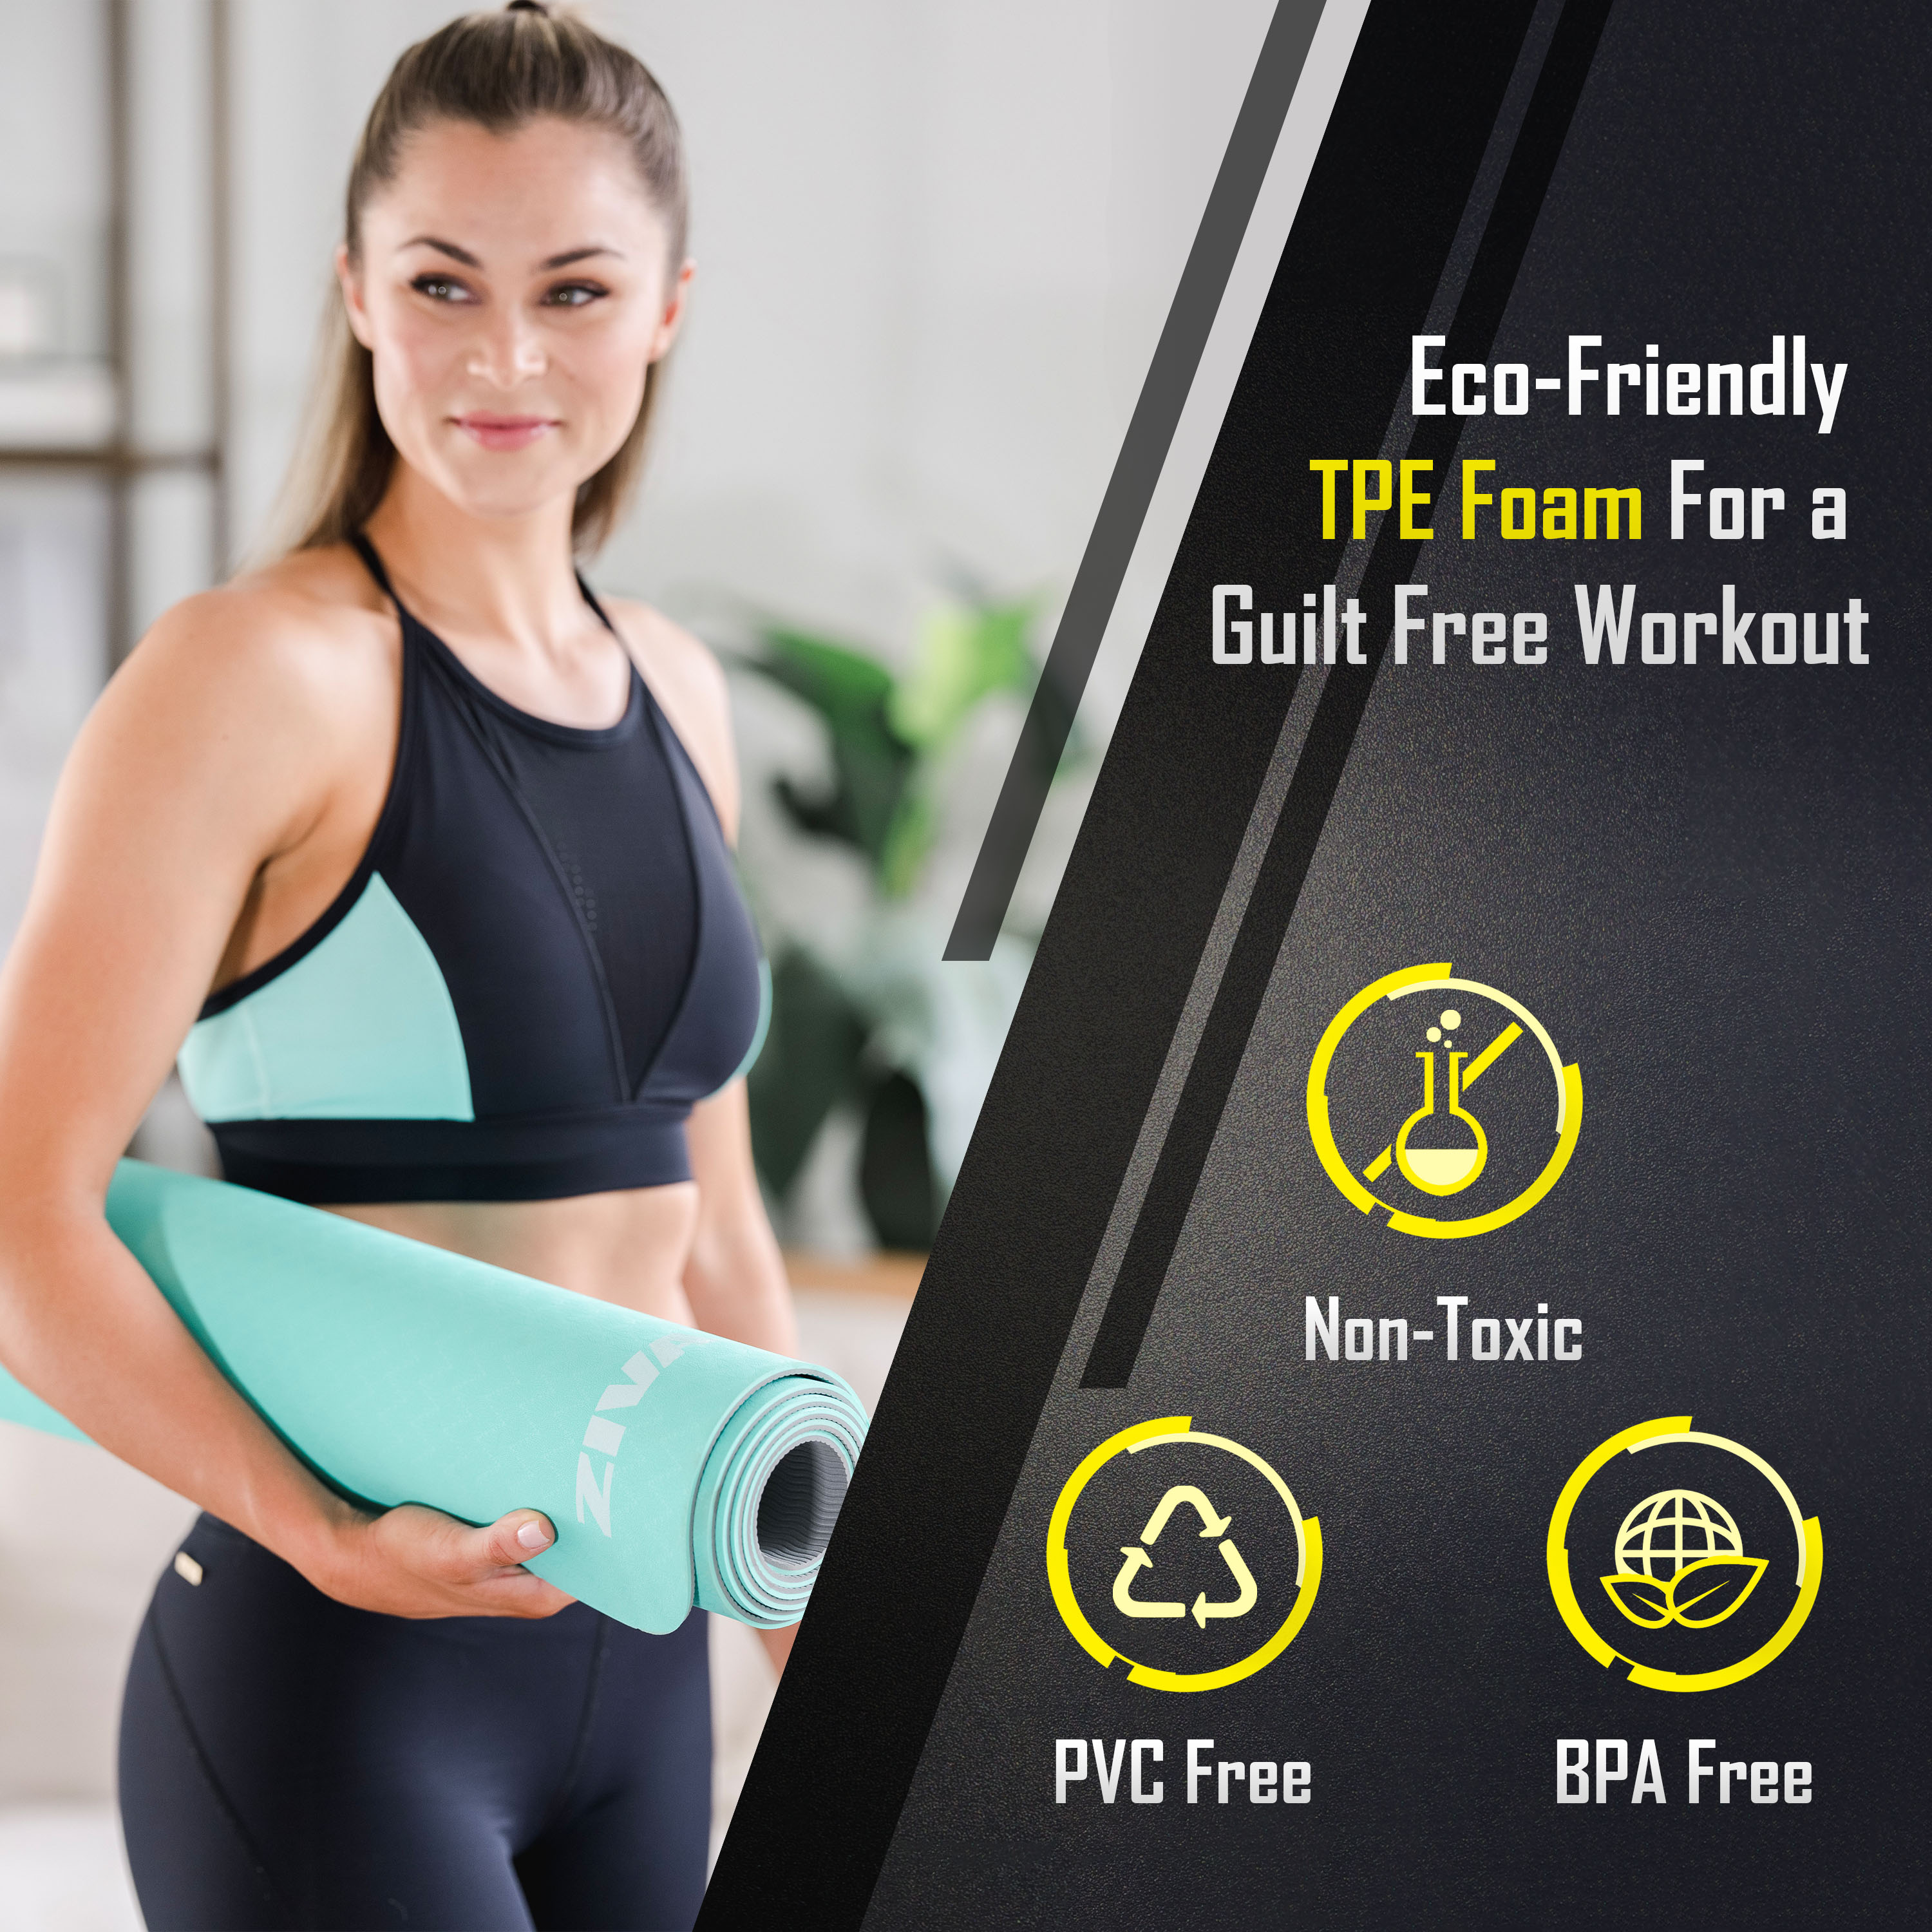 Eco-friendly TPE foam for a guilt free workout. PVC free, Non-toxic, and BPA free.